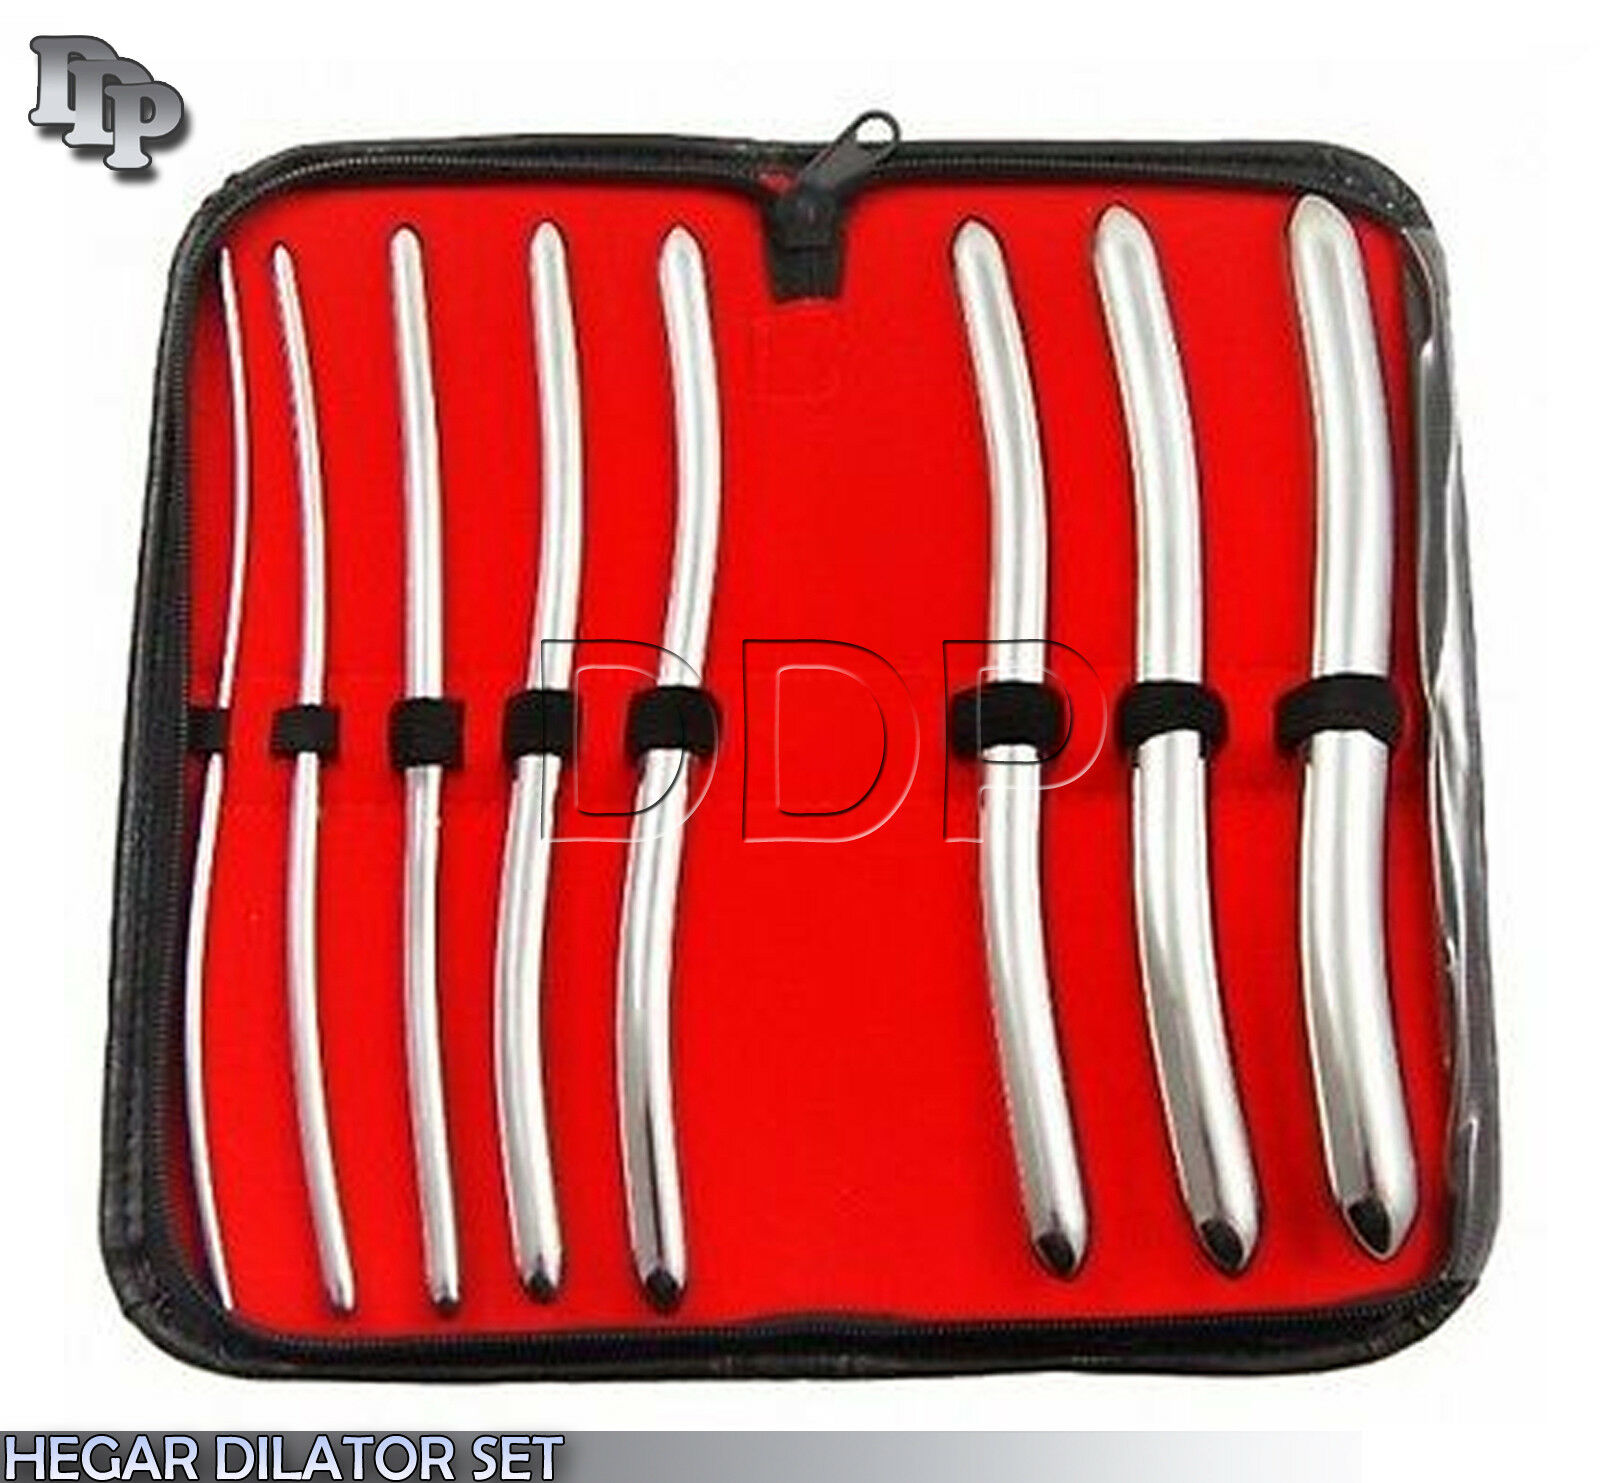 8 Pieces Set Of Hegar Uterine Dilator With Carrying Case Surgical Gynecology